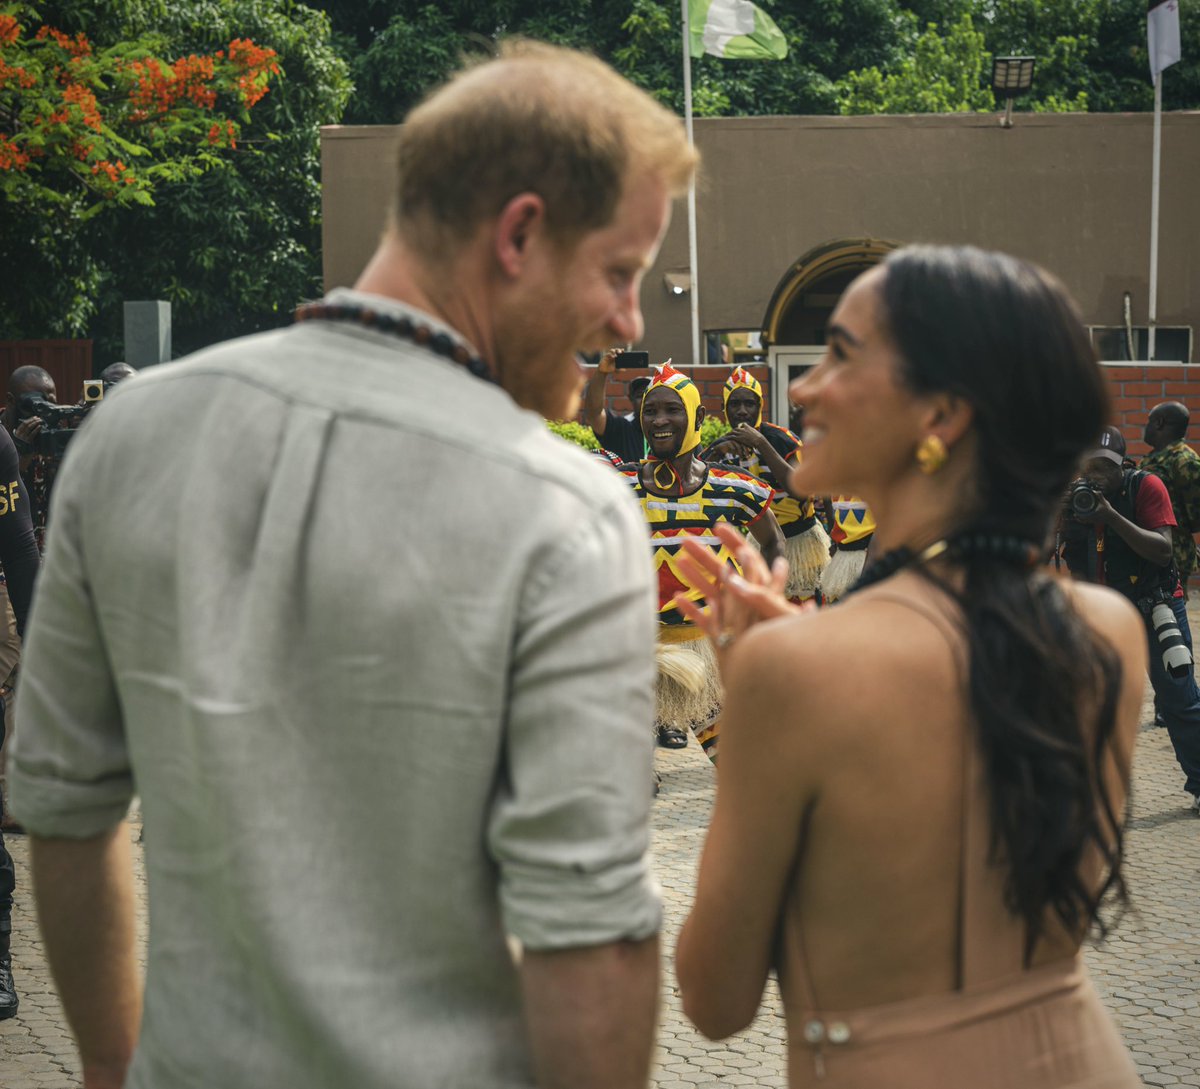 6 years later and Meghan and Harry appear to be more in love and happy. #Sussexes6thAnniversary